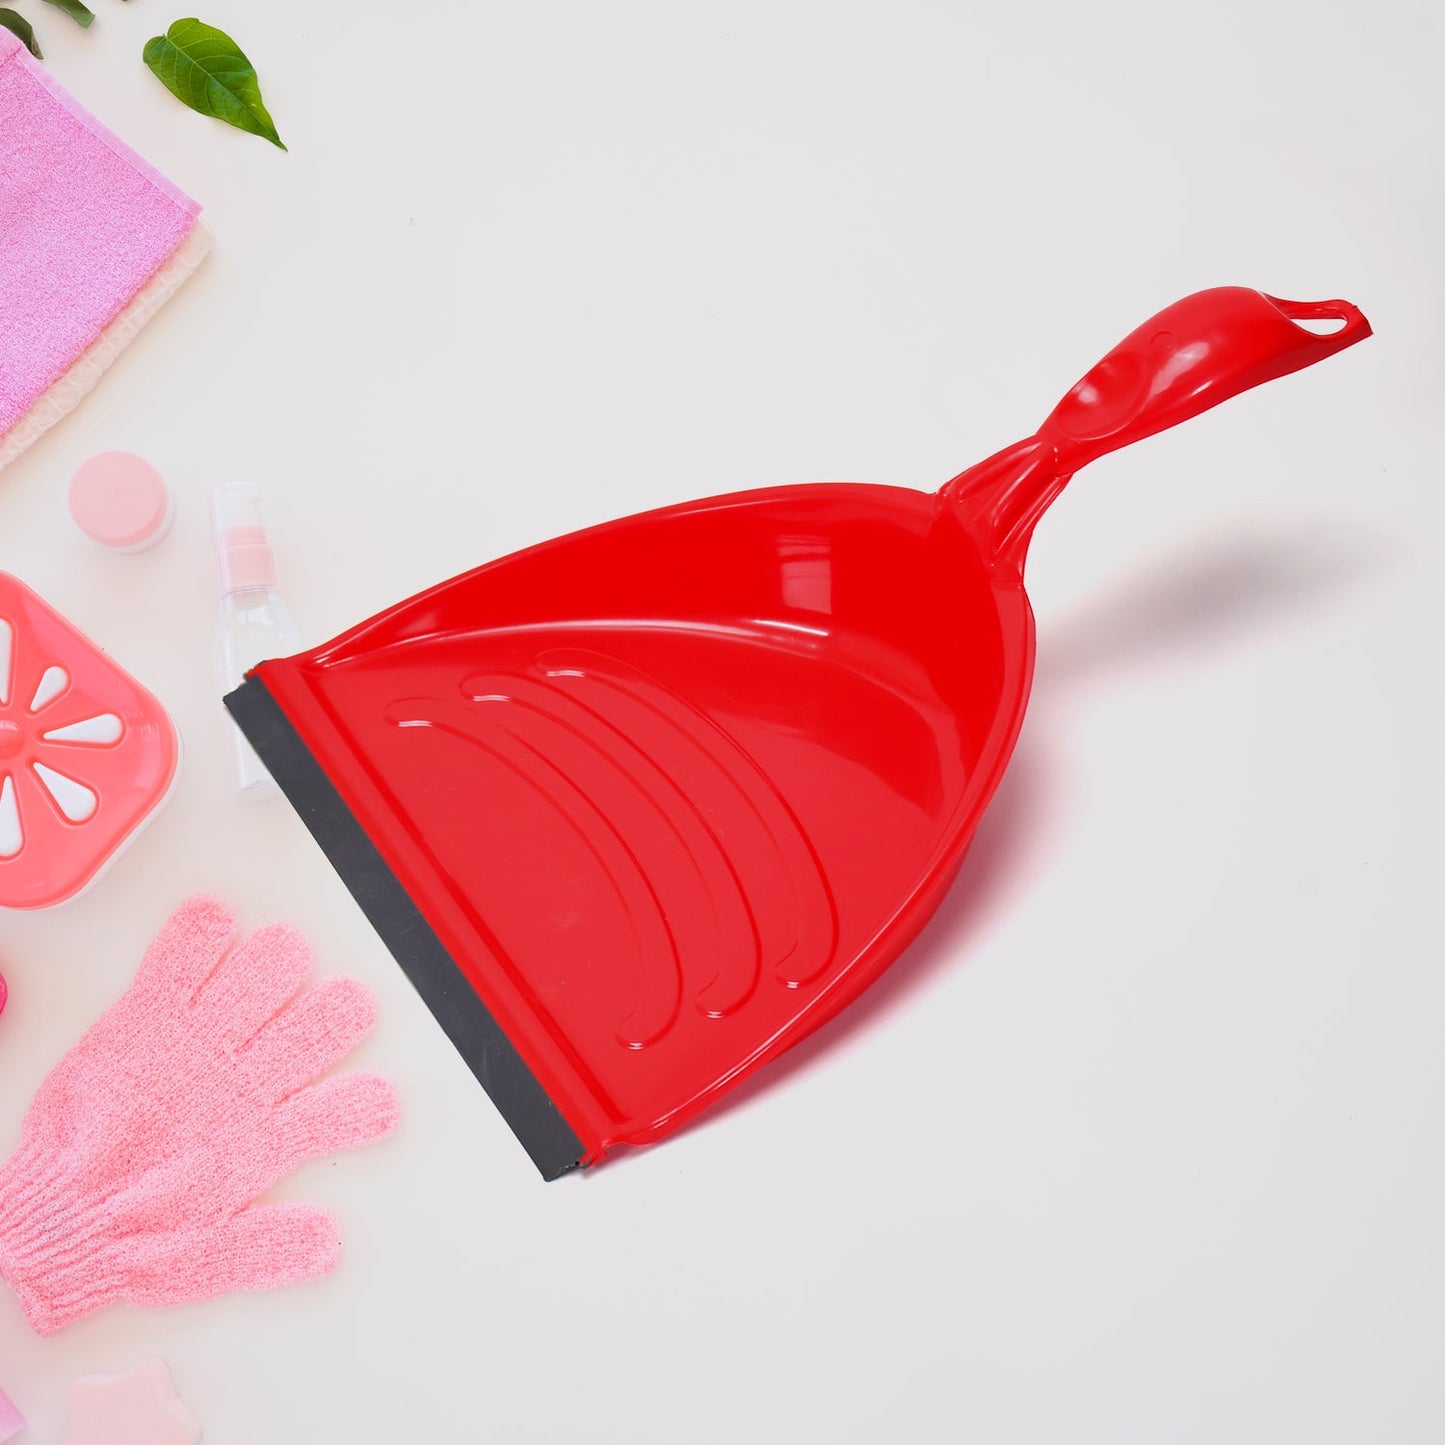 Multipurpose Dust Collector Dustpan Set with Brush, Dust Collector Pan with Long Handle, Supadi